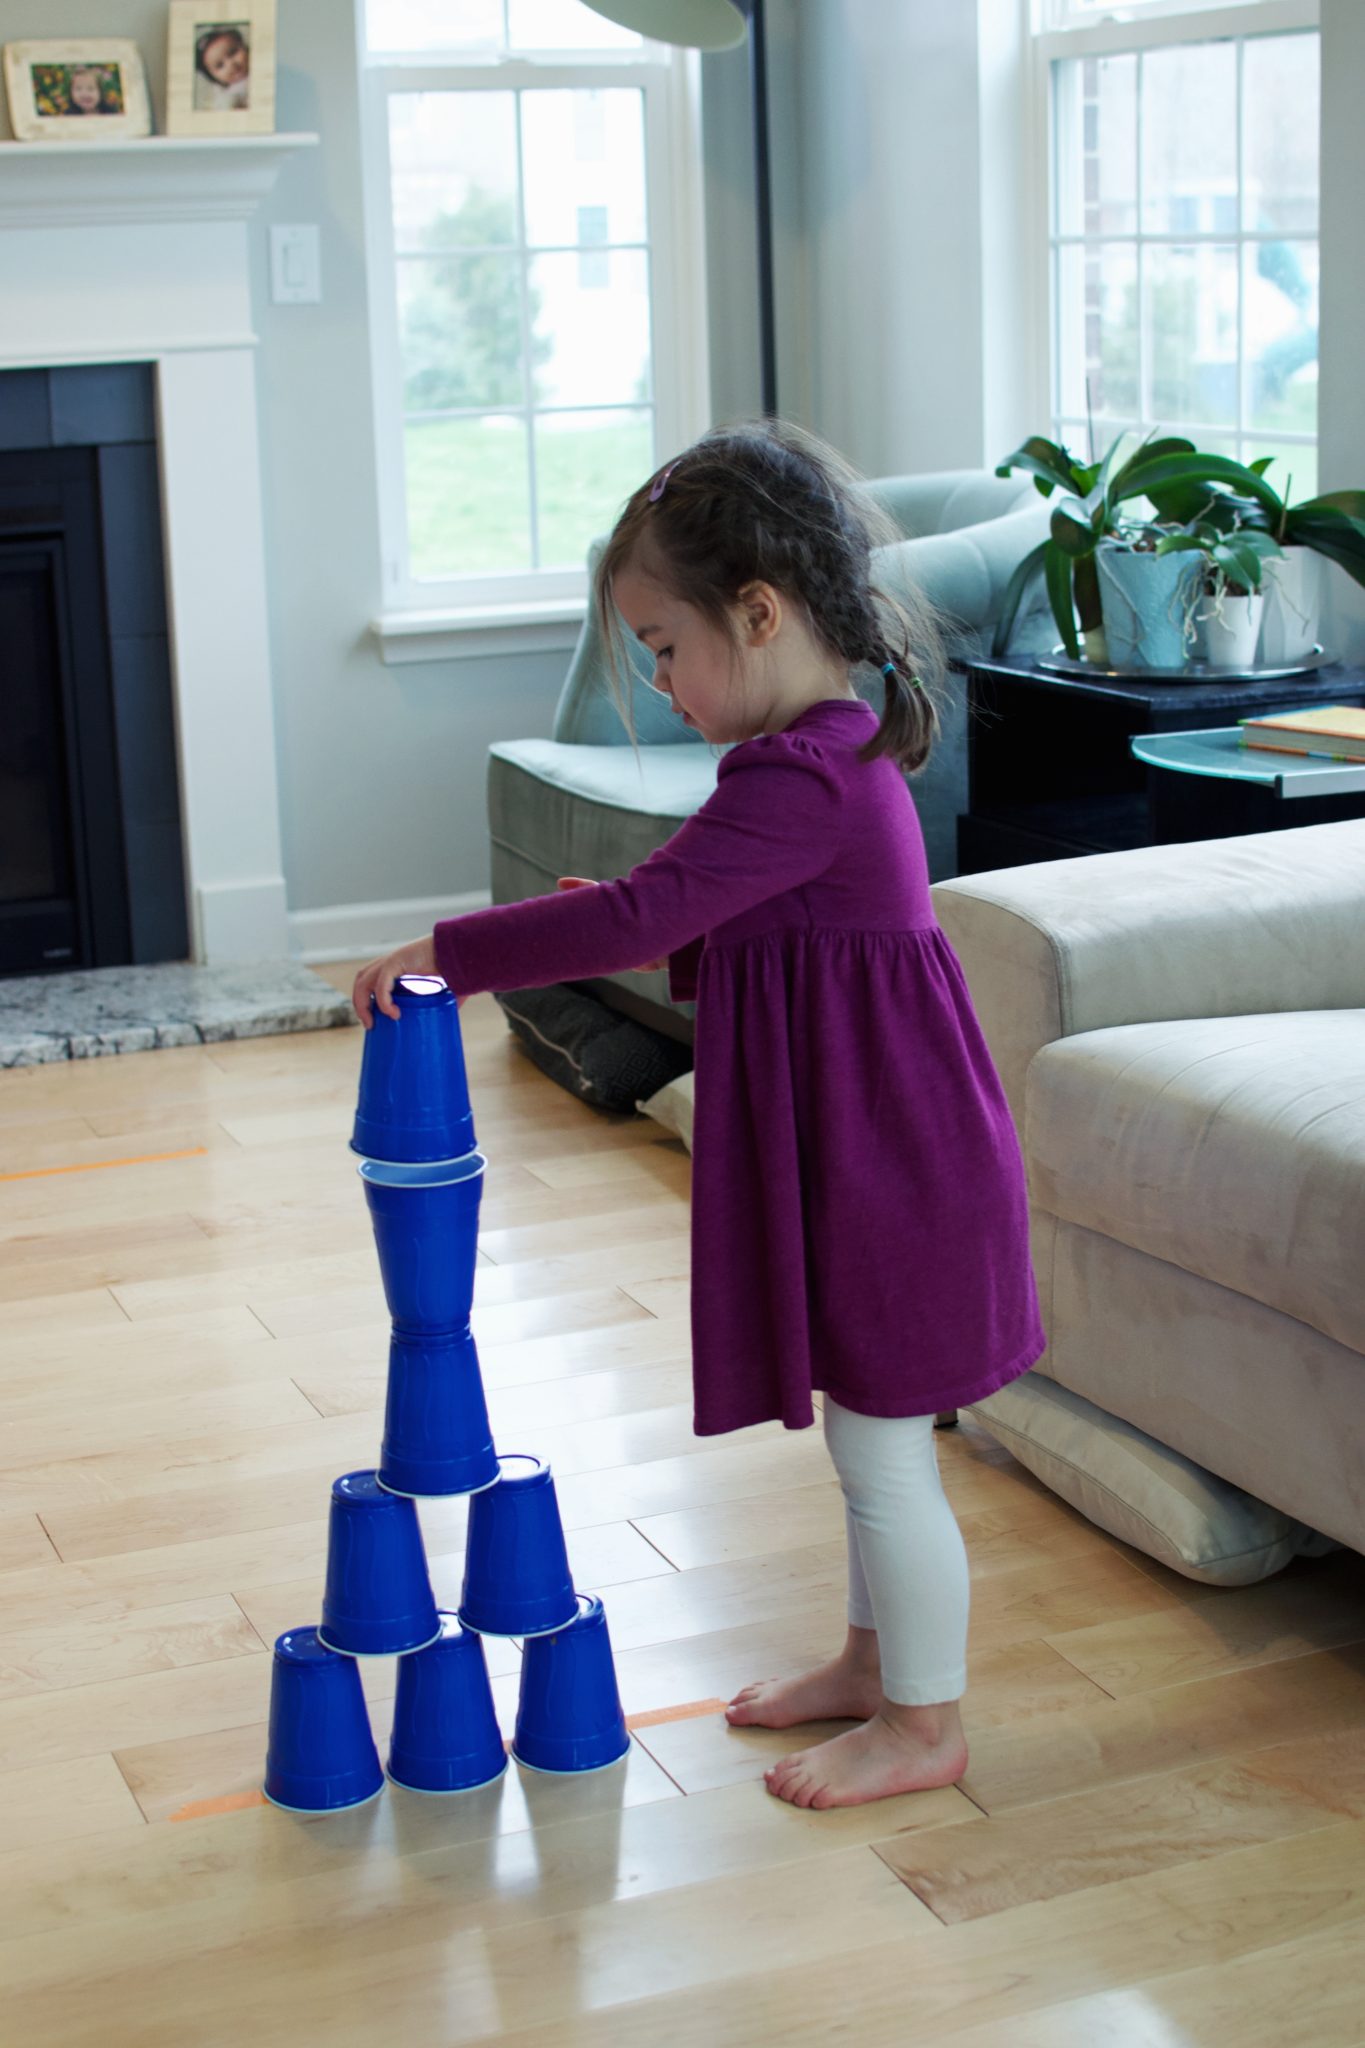 Online Learning Games for Preschoolers: Cups